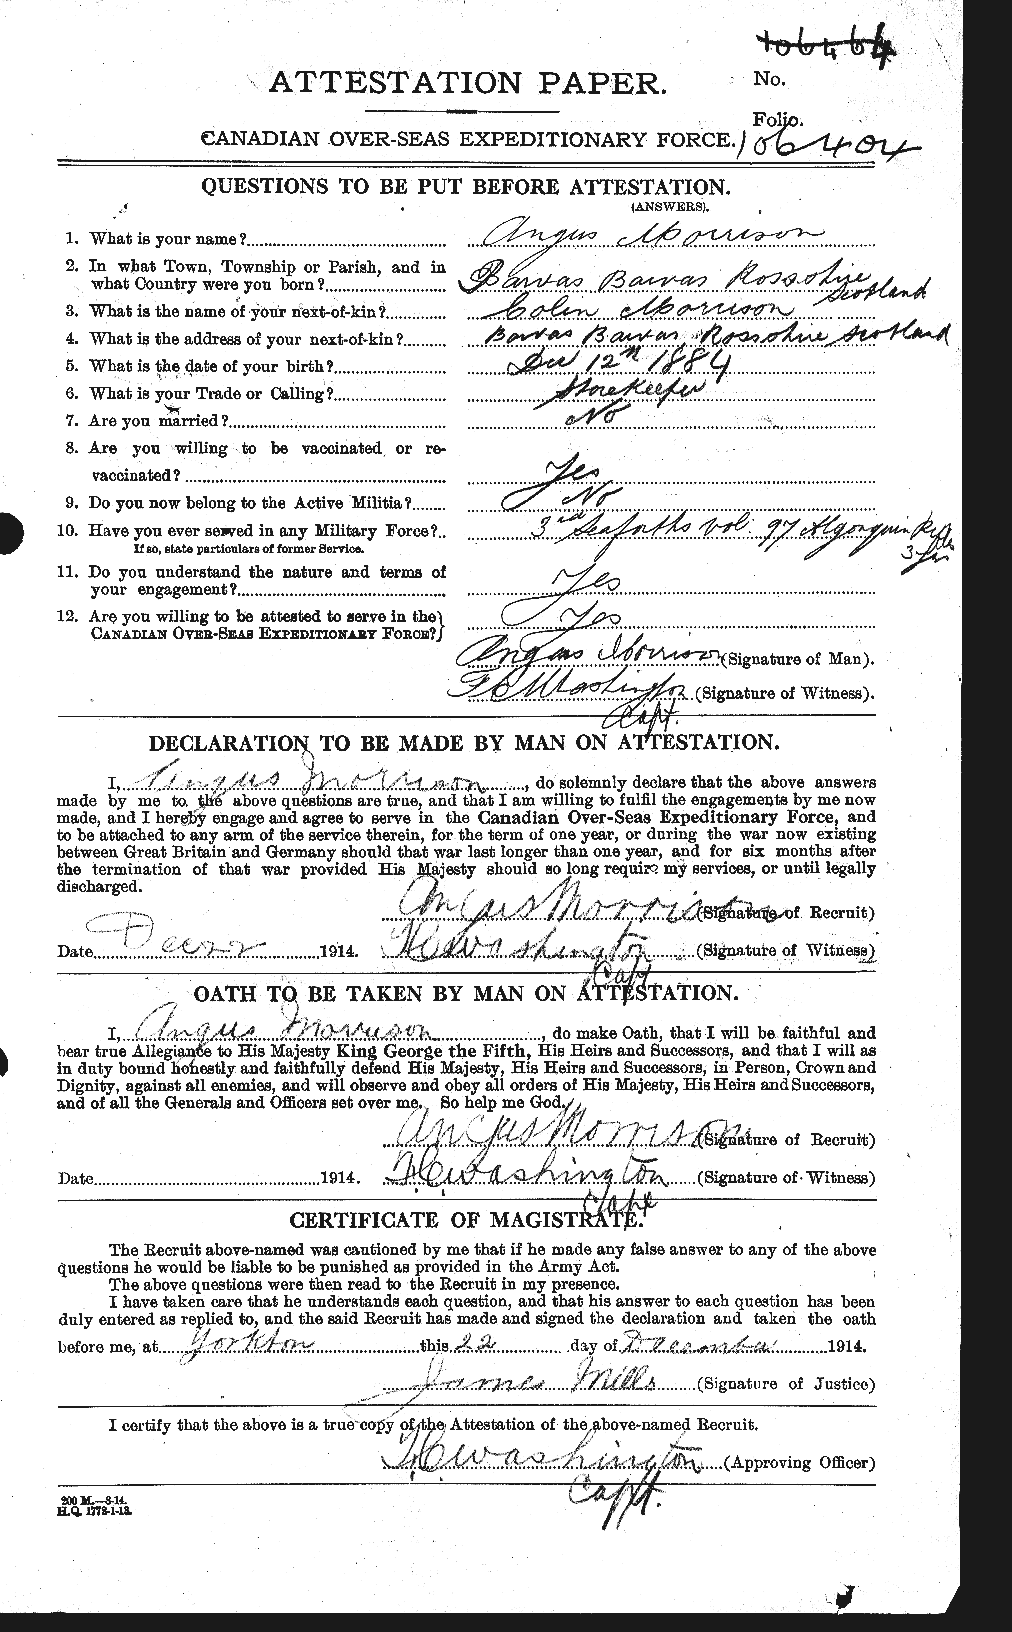 Personnel Records of the First World War - CEF 511035a